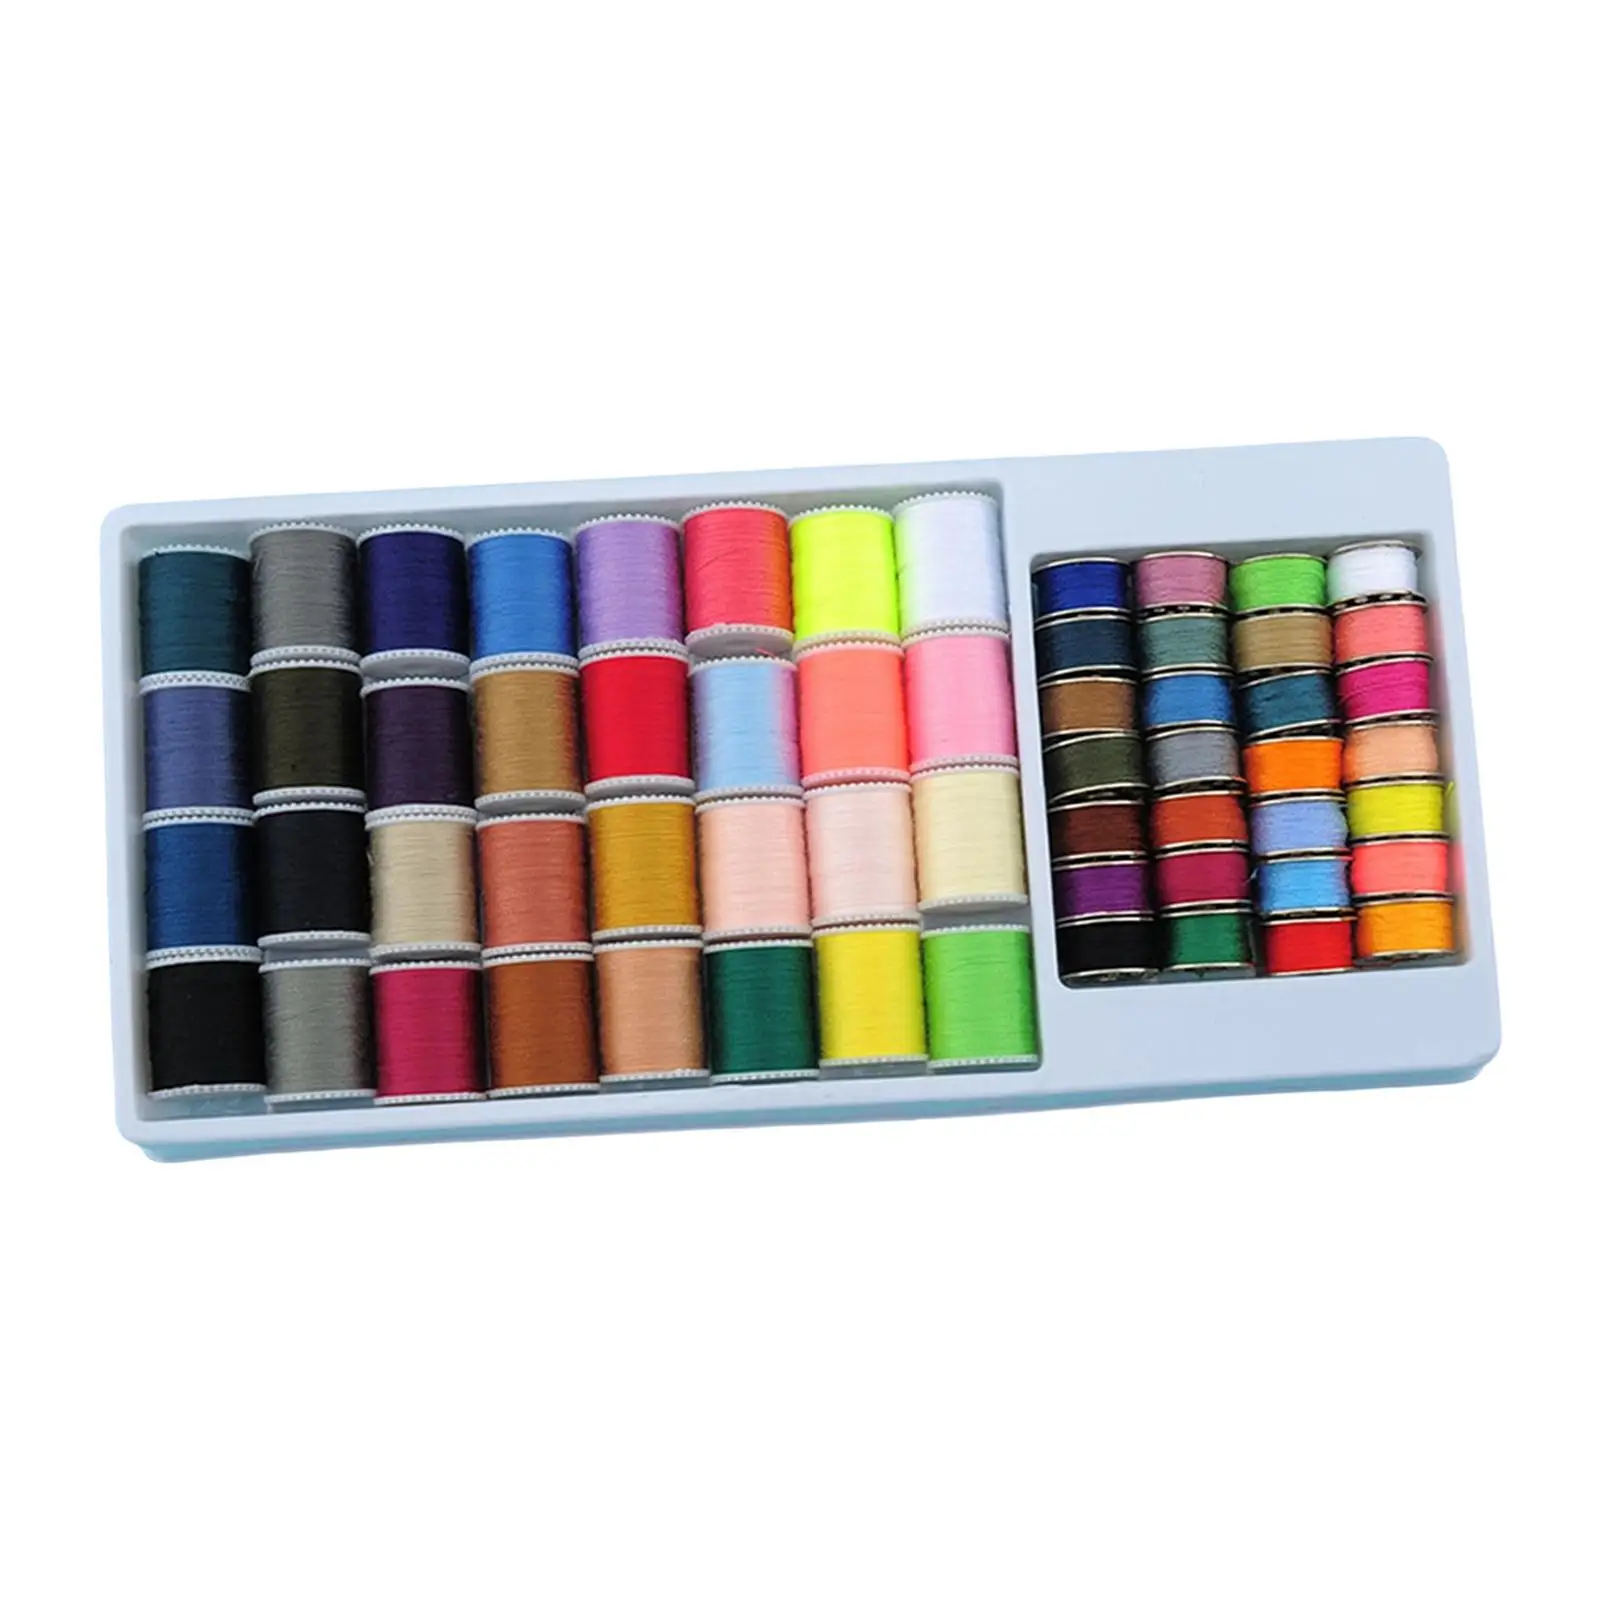 60Pcs Sewing Thread Kit Sewing Thread Spools Bobbins Travel Adults Polyester Thread Spools for Embroidery Household Accessories